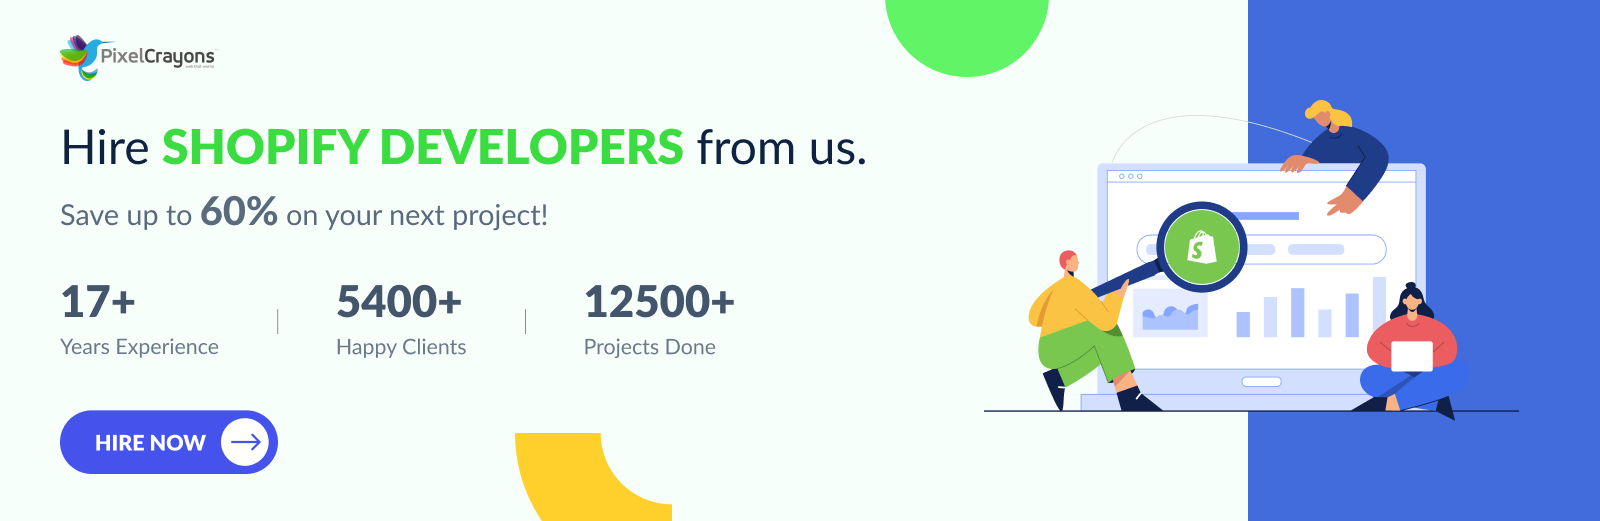 Hire Shopify developers